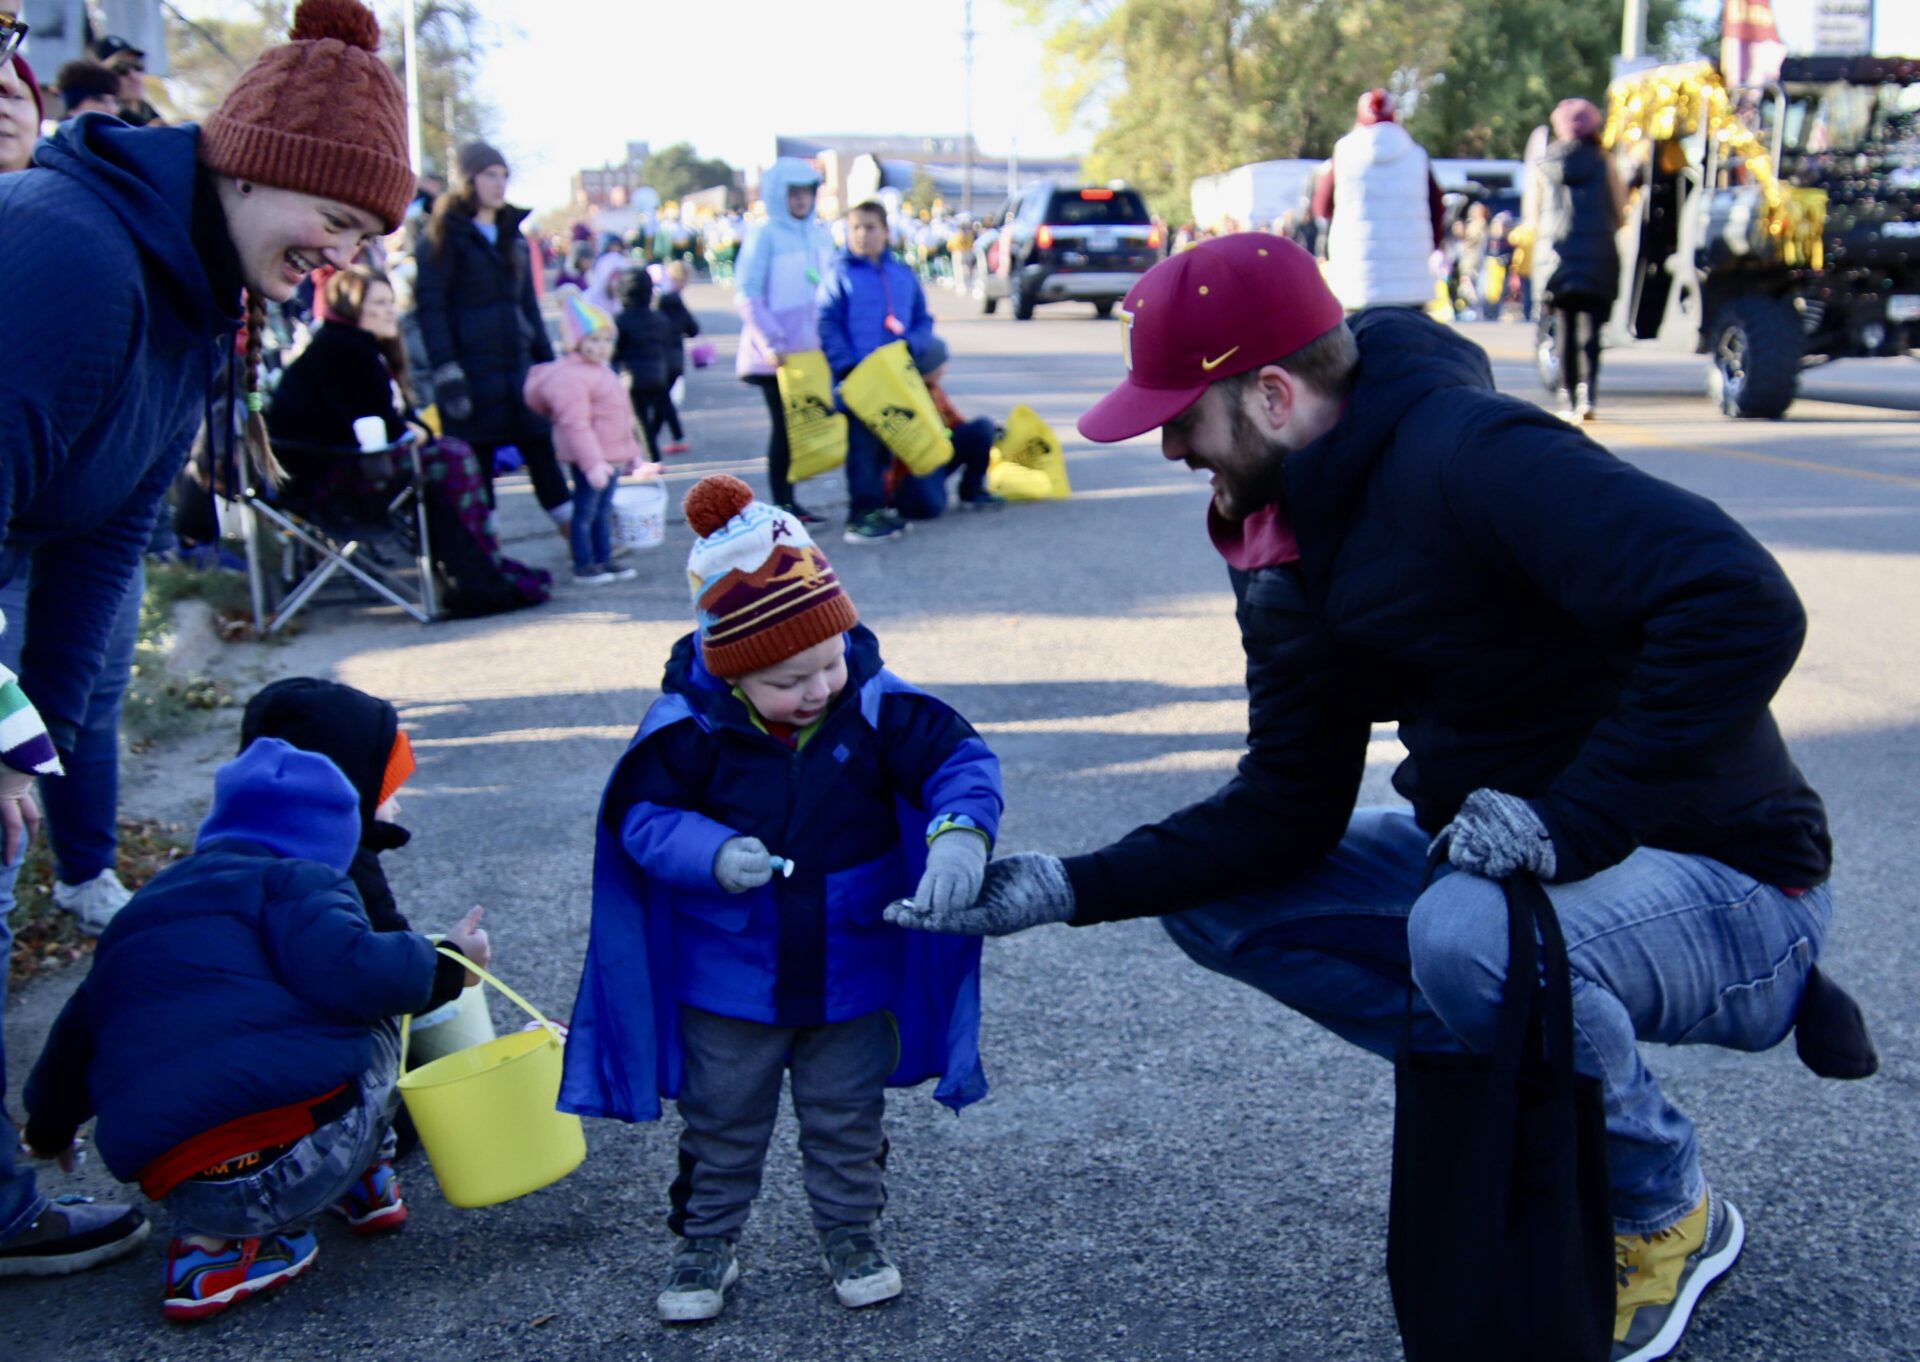 Tyler Oliver hands out candy to a child attending the 2023 Northern State University homecoming parade on Saturday, Oct. 7. Aberdeen Insider photo by Scott Waltman